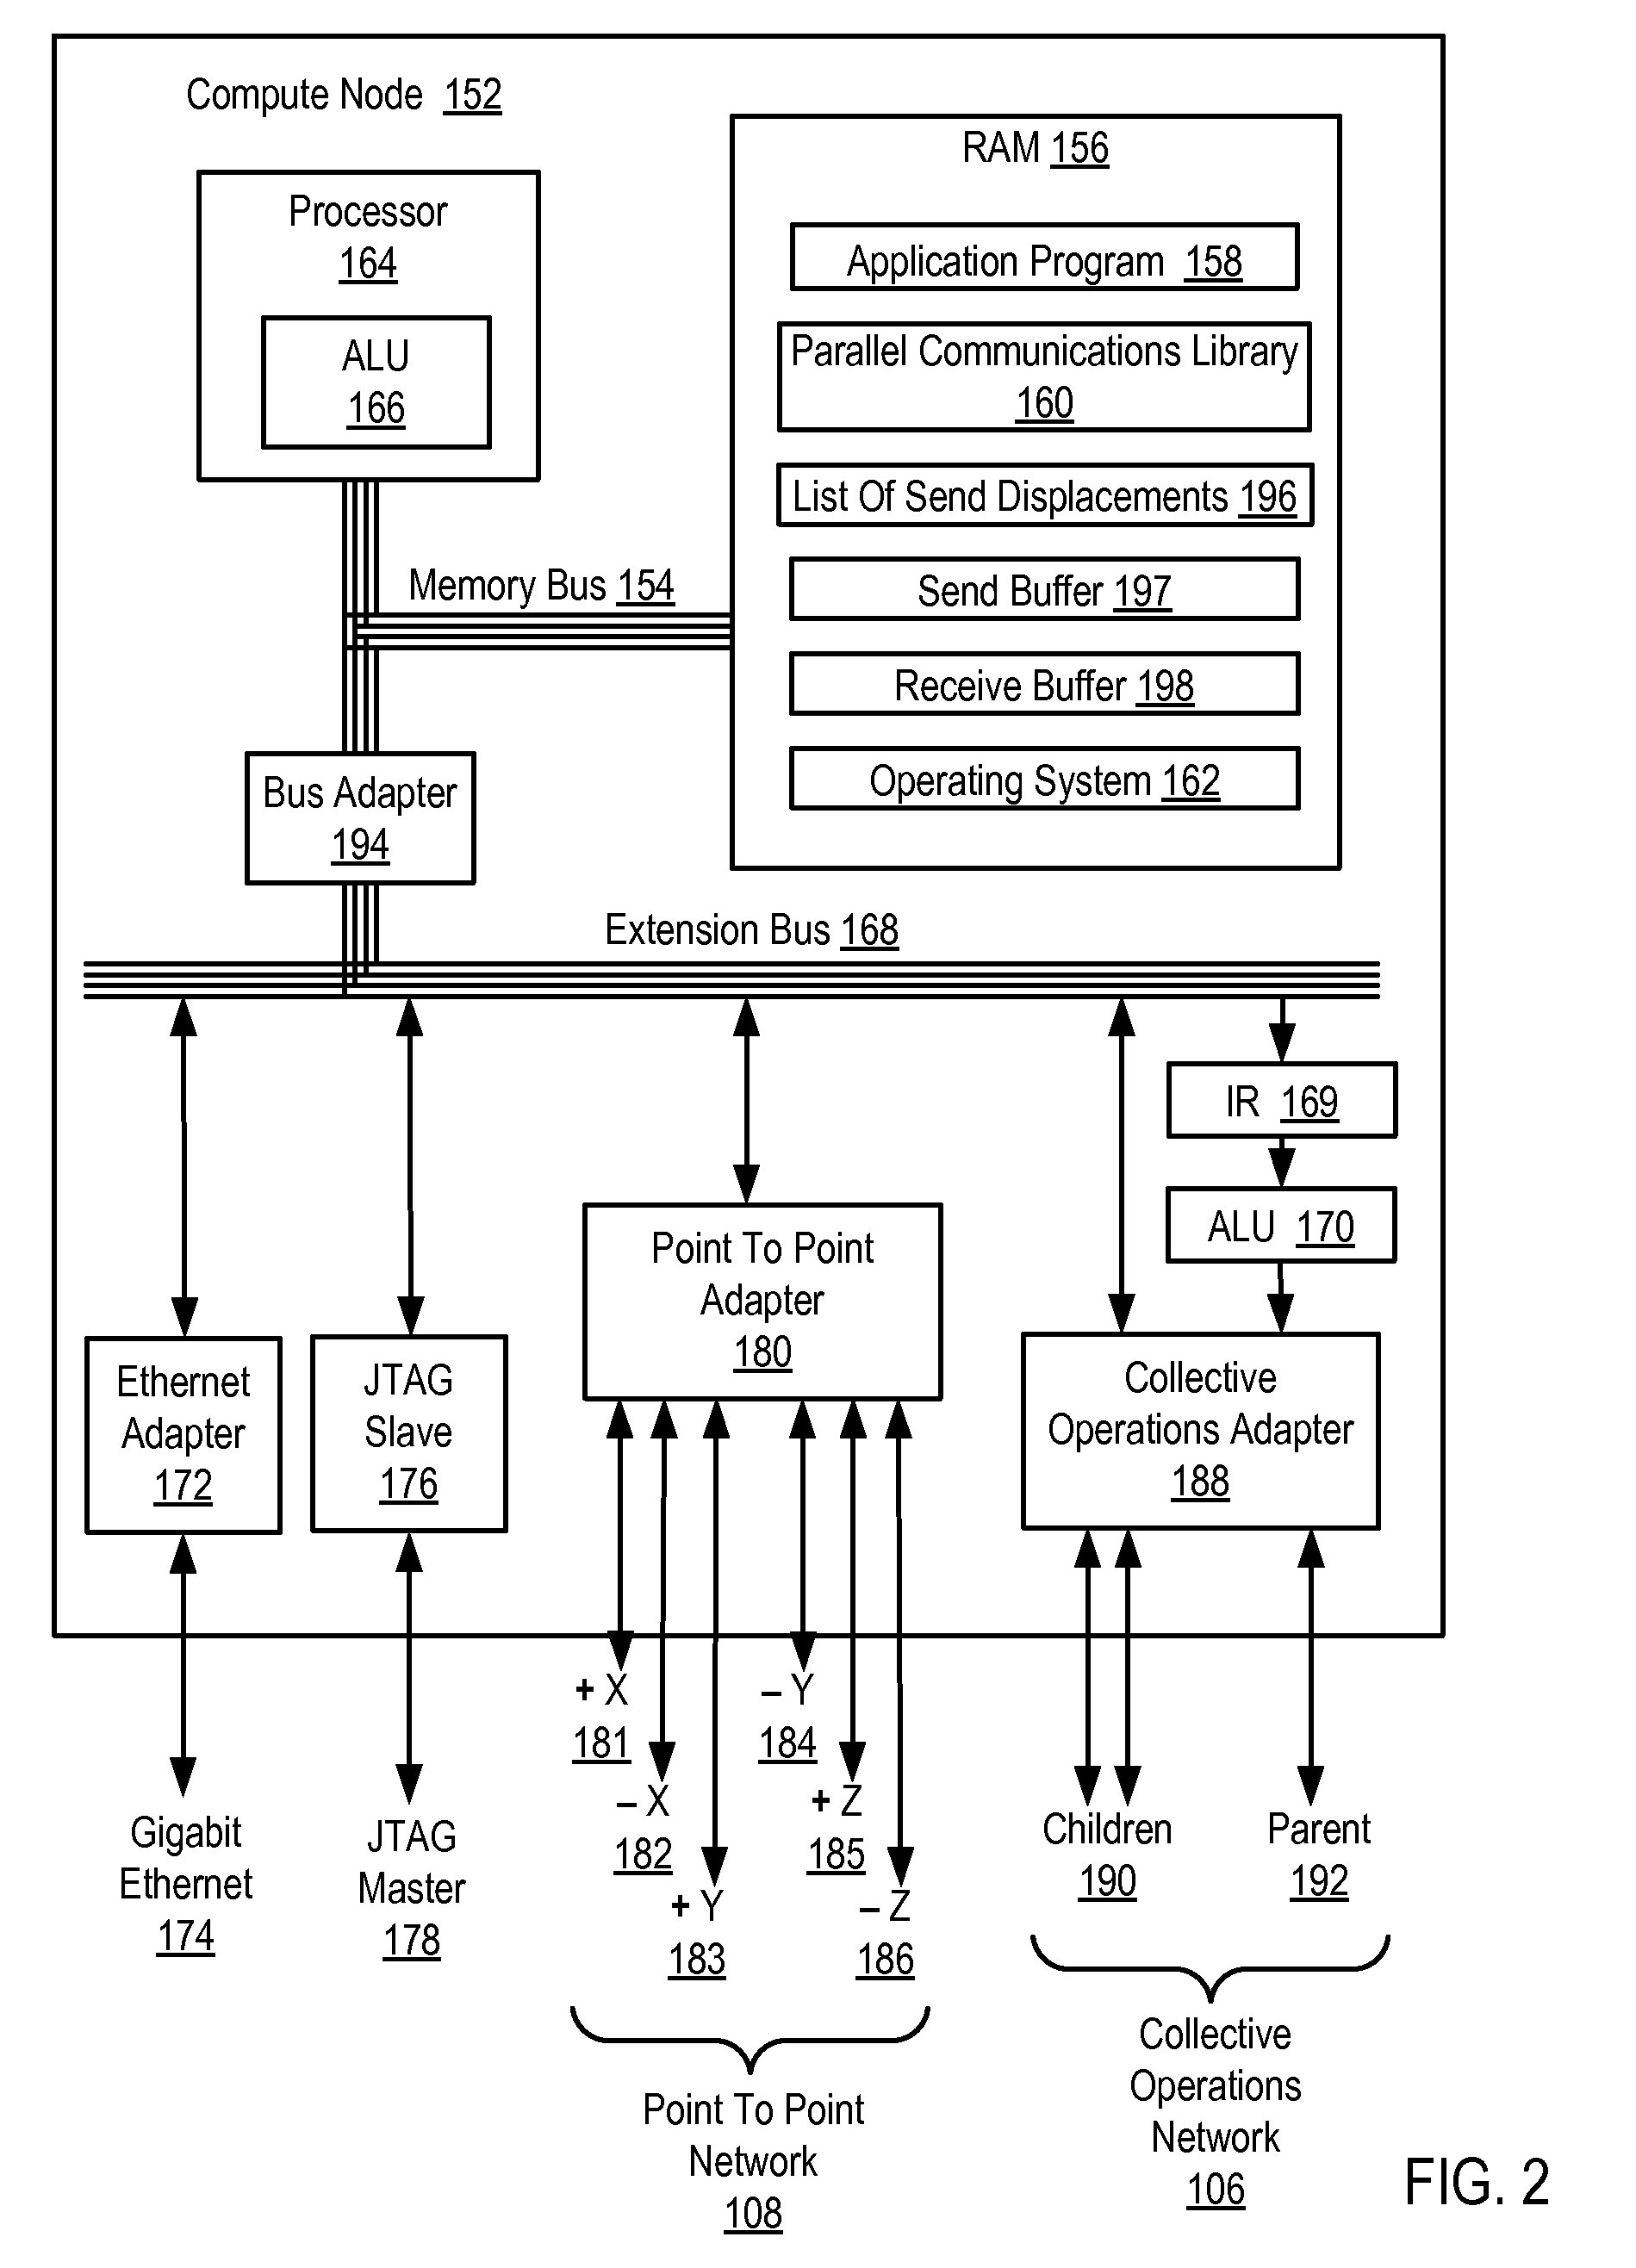 Executing an allgather operation with an alltoallv operation in a parallel computer